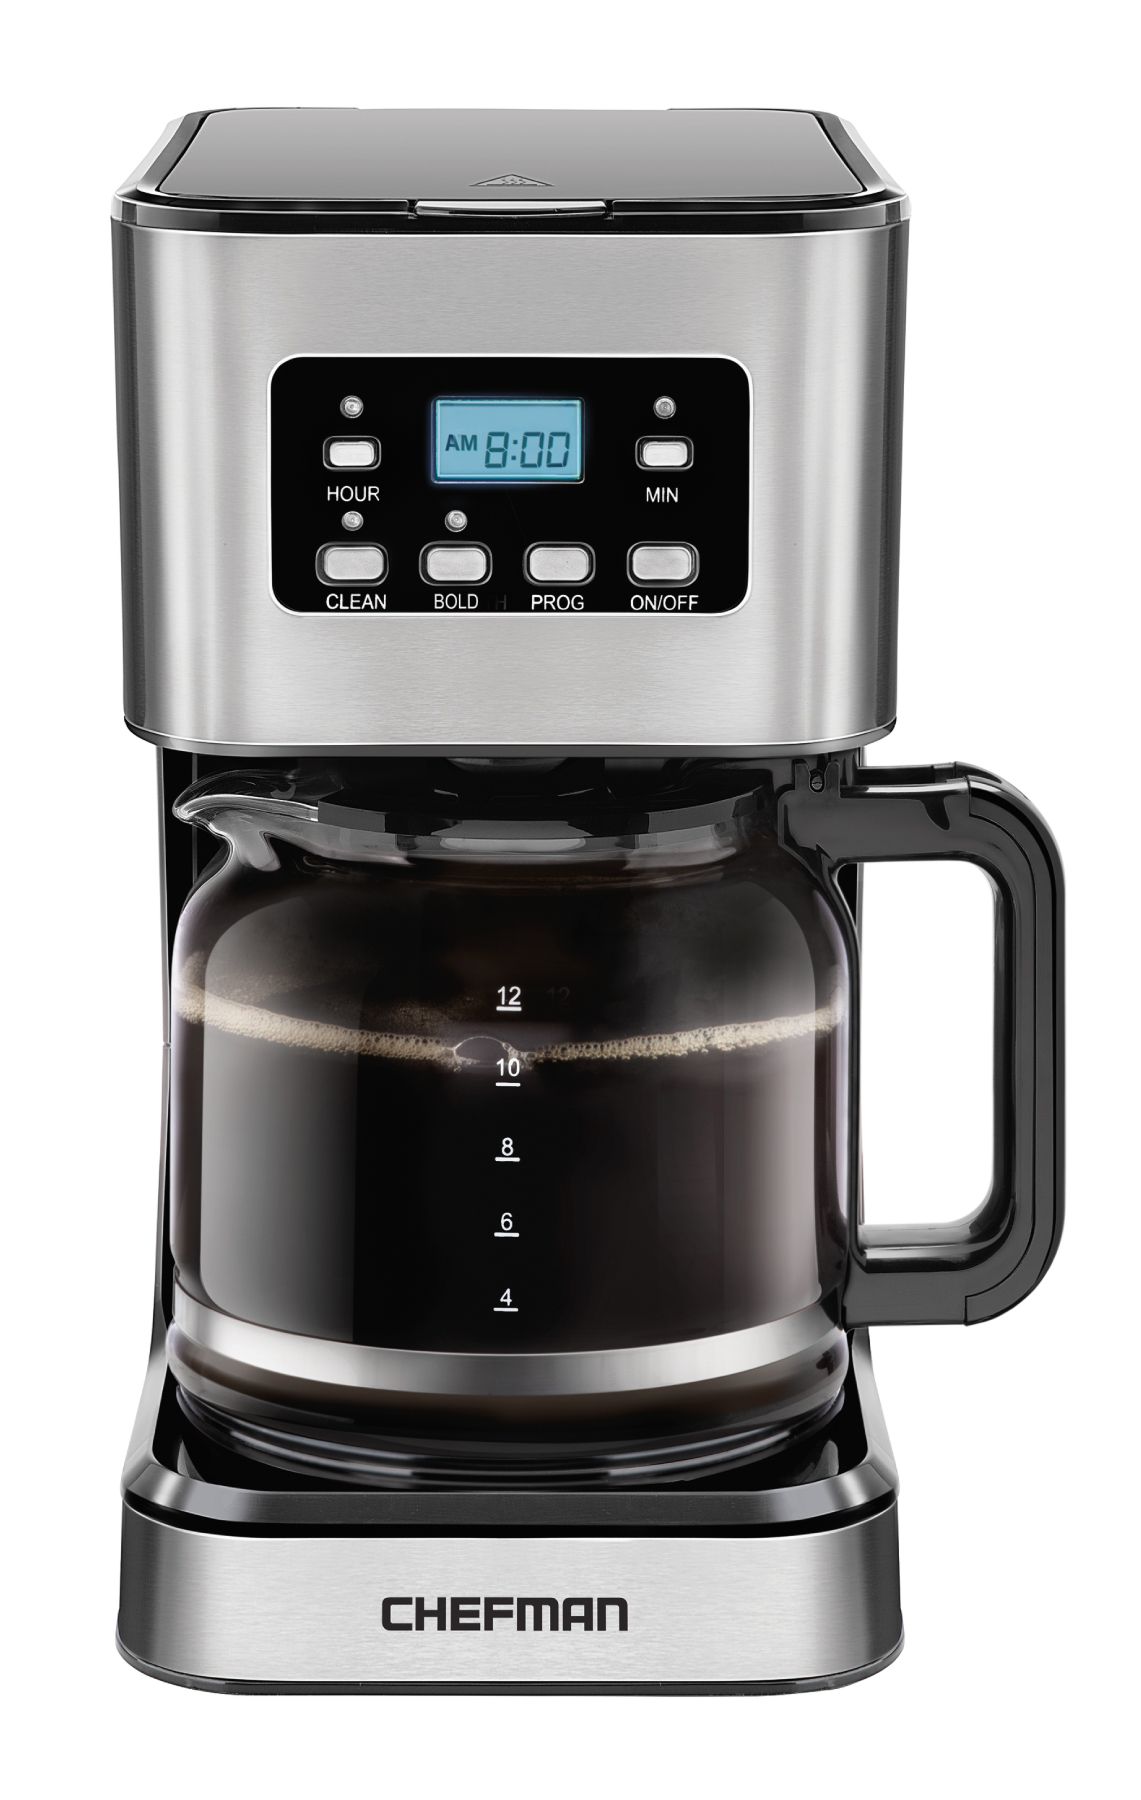 Hamilton Beach 12 Cup Programmable Drip Coffee Maker with 3 Brew Options,  Glass Carafe, Auto Pause and Pour, Black with Stainless Accents (46299)